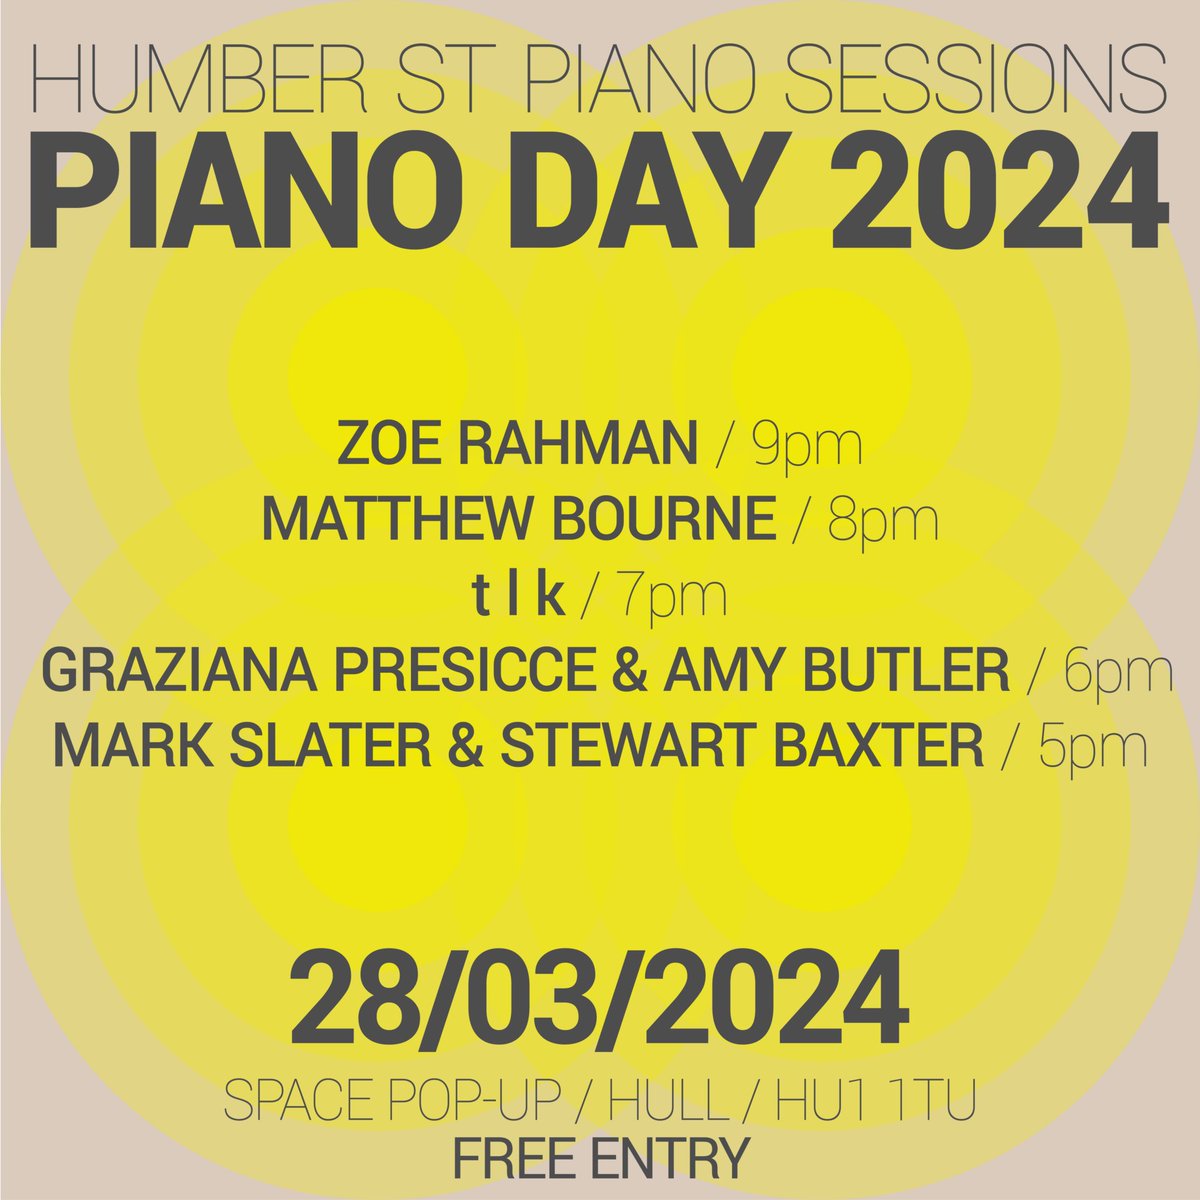 Hull is celebrating #WorldPianoDay! 🎹 So looking forward to join this celebration alongside some fantastic artists and friends, next week. 🥳 The piano is featured all day - and if you would like to hear some #pianoduets, join me and Amy Butler at 6pm (1-2 Pier Street, Hull)!